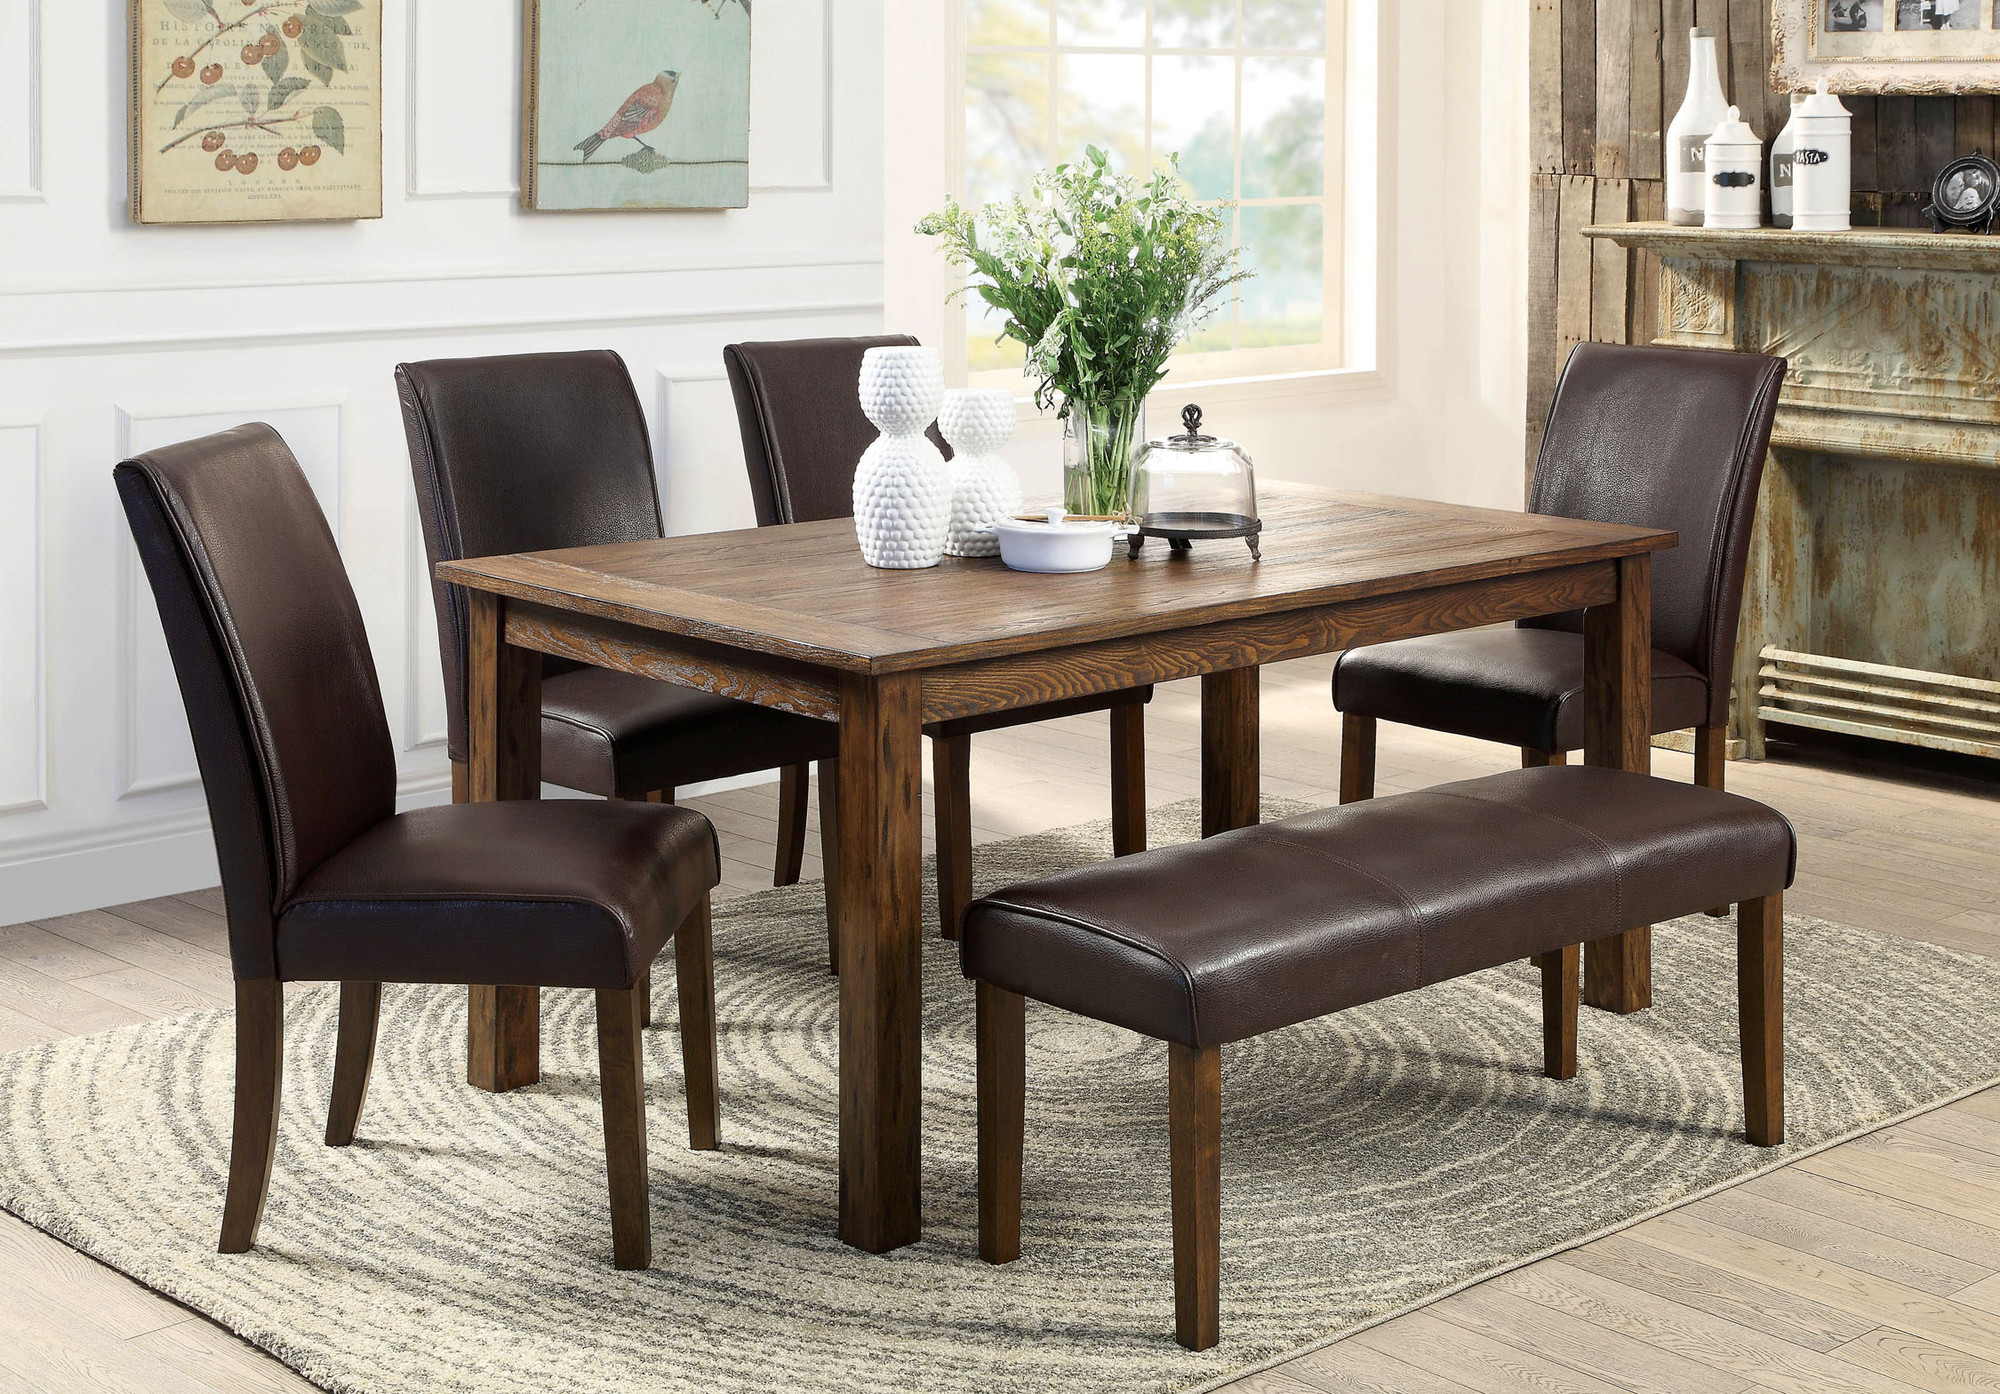 Small Rectangular Kitchen Table Sets
 Small Rectangular Kitchen Table